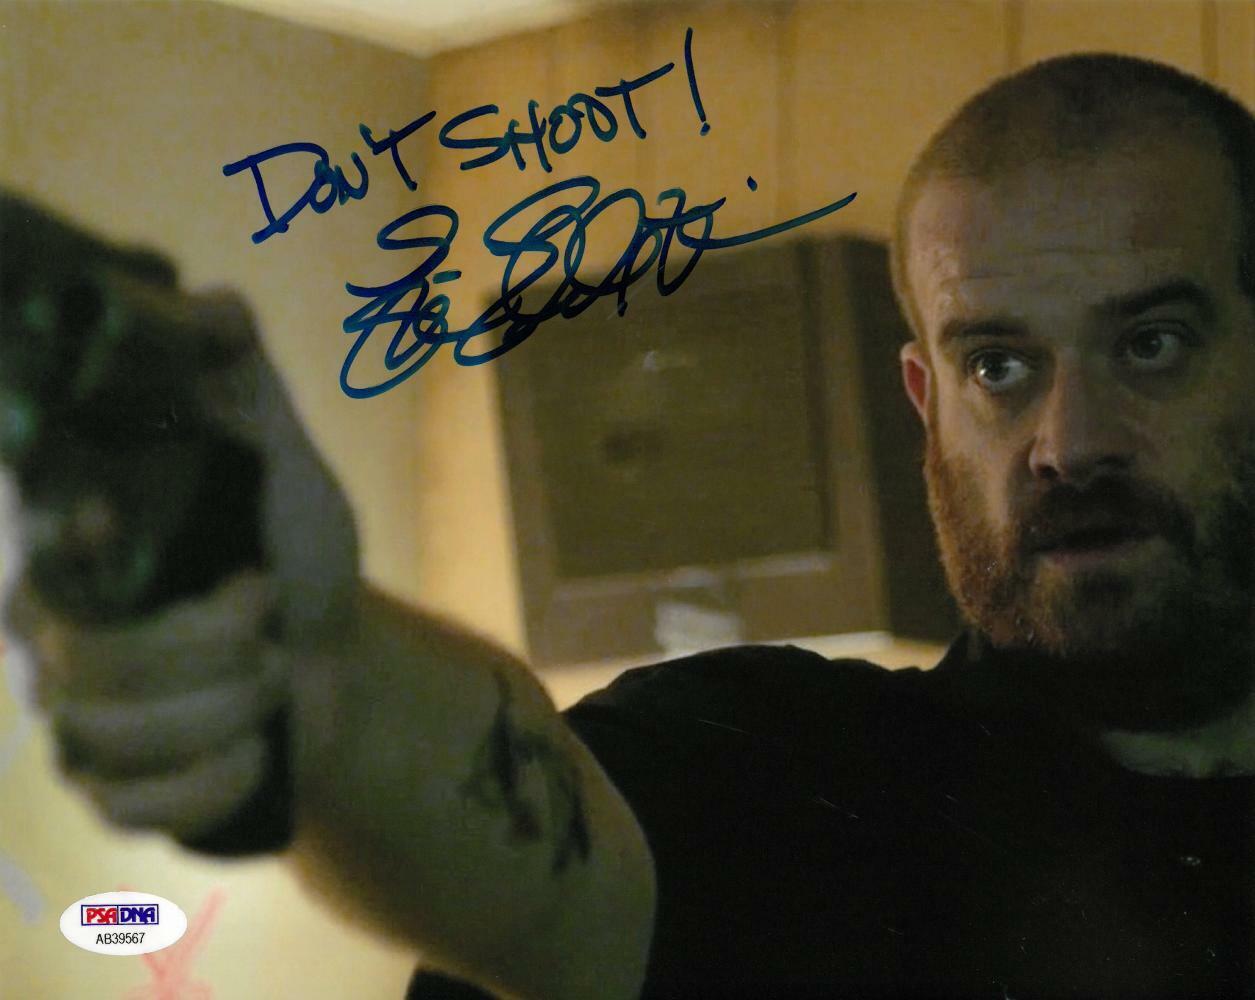 Eric Edelstein Signed Green Room Autographed 8x10 Photo Poster painting PSA/DNA #AB39567